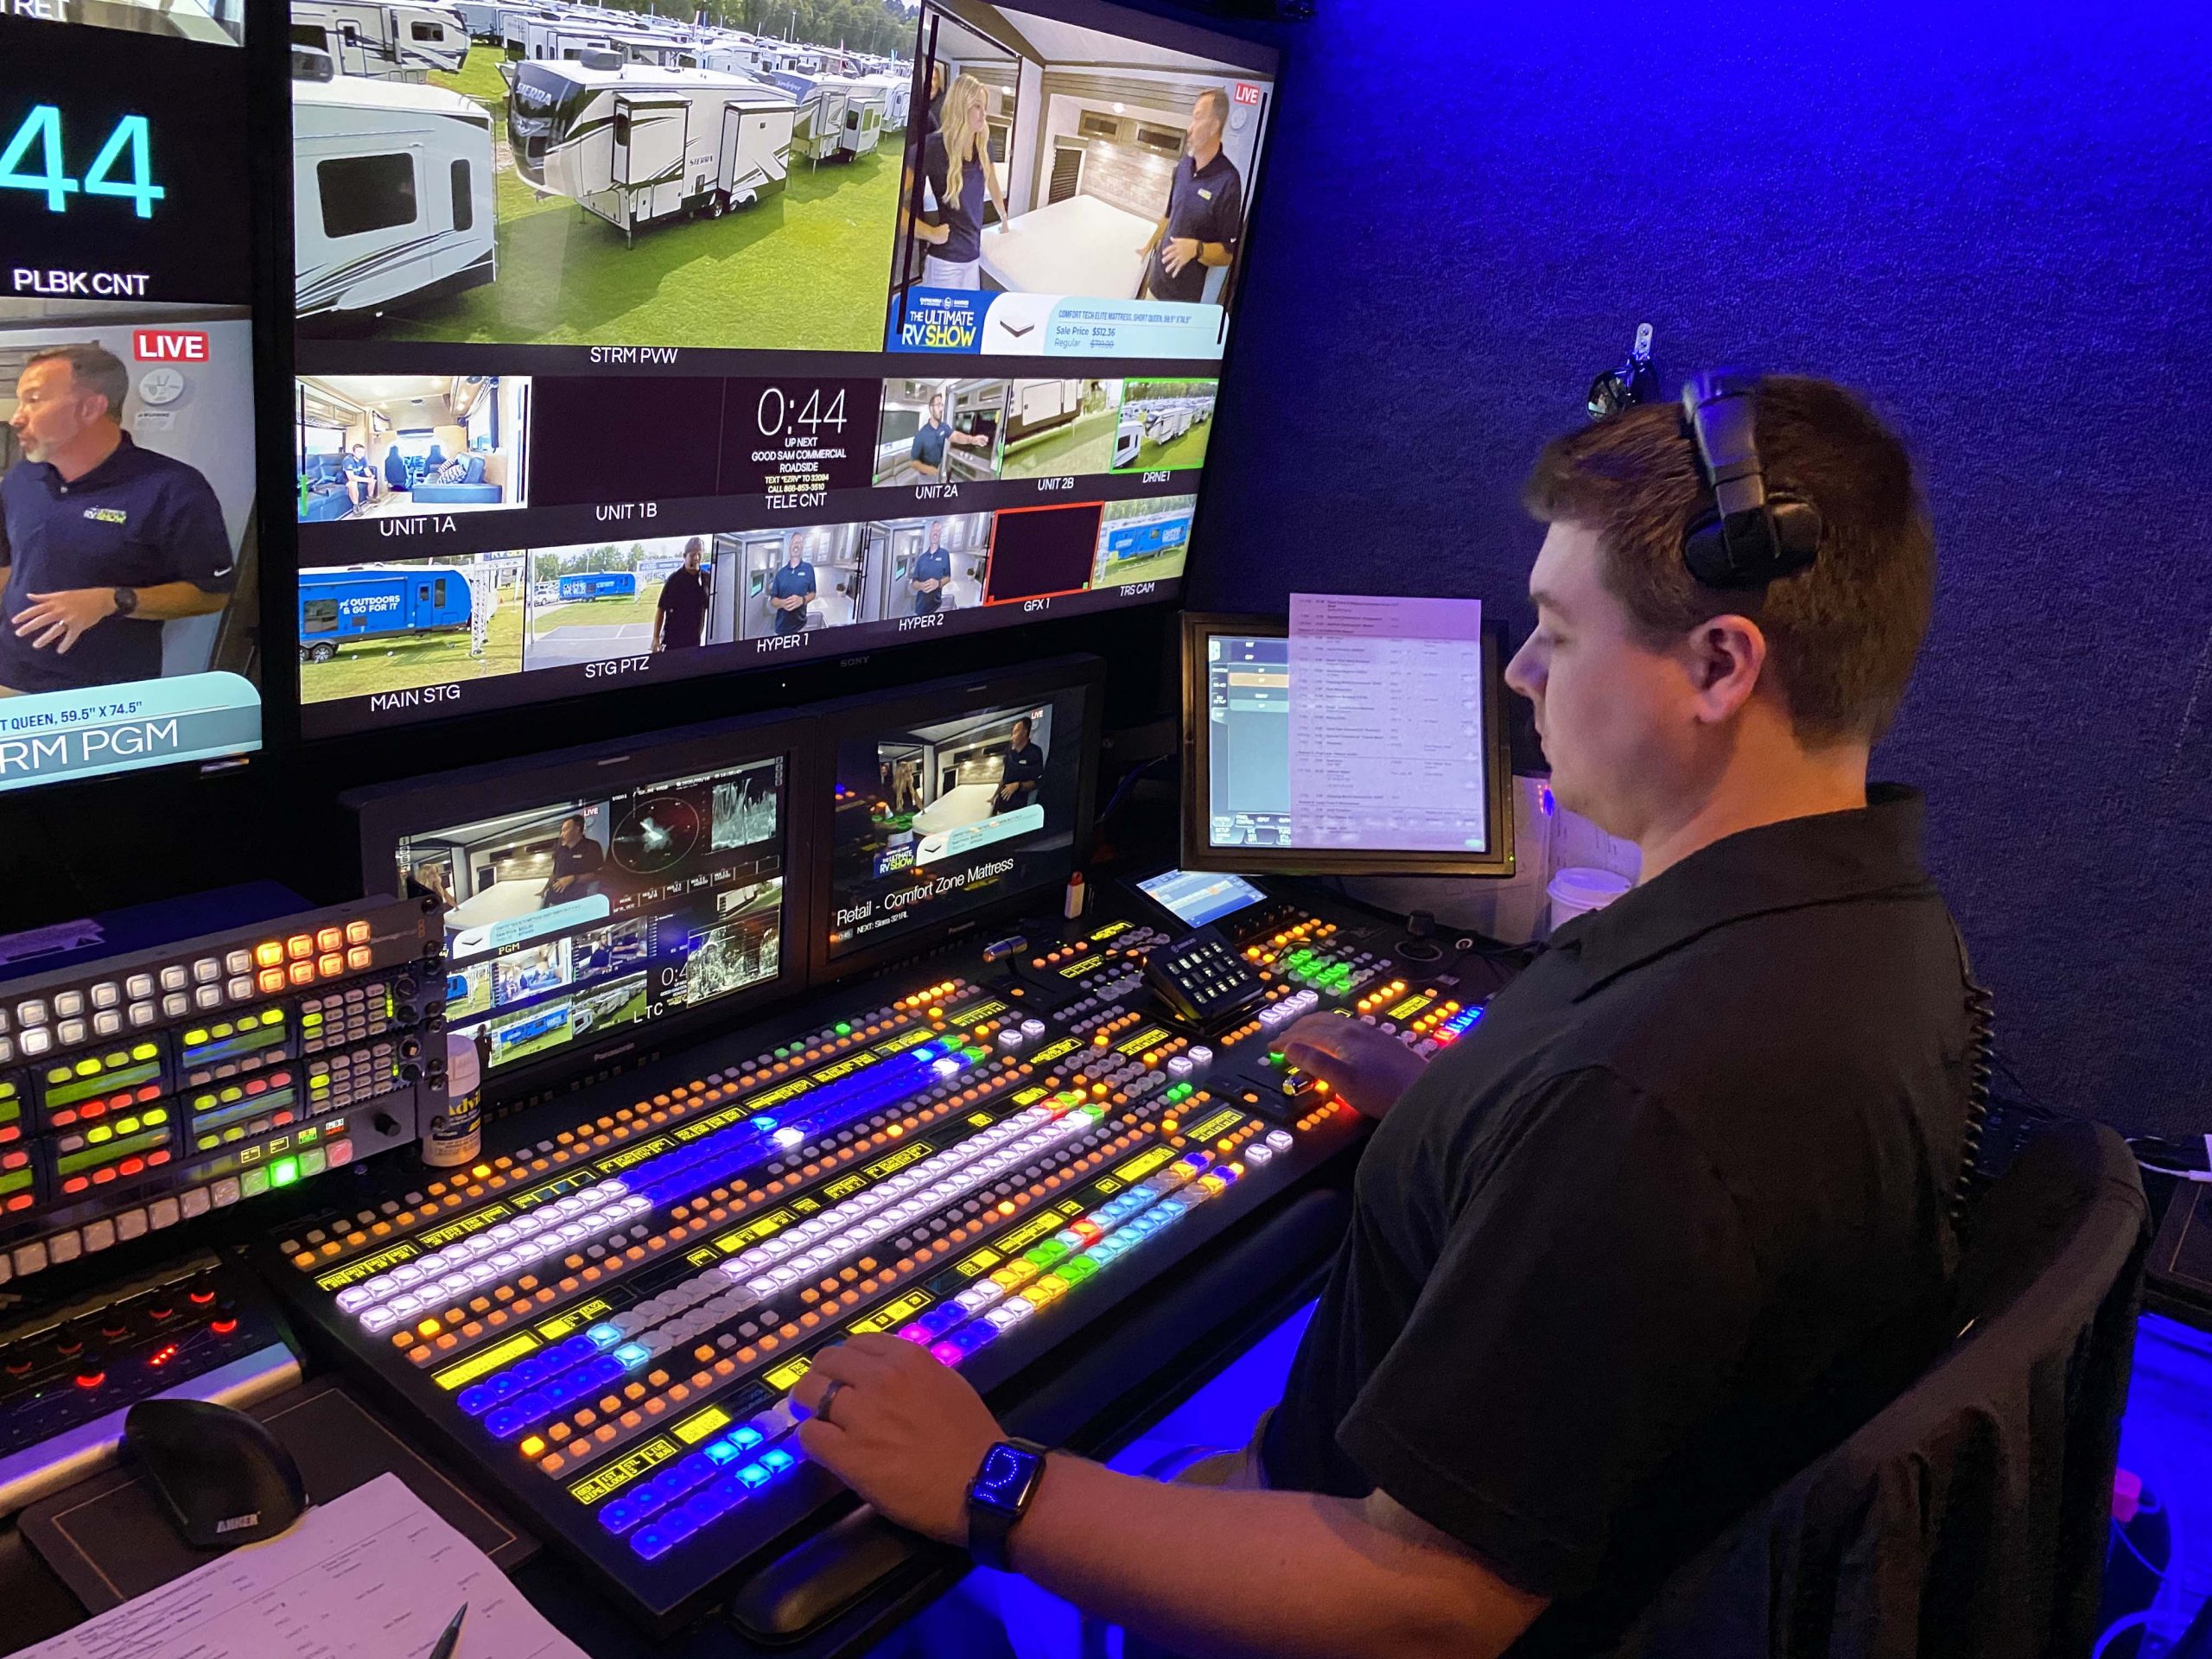 Ultimate RV Show Churns Out 49 Hours of Content With FORA’s HVS2000